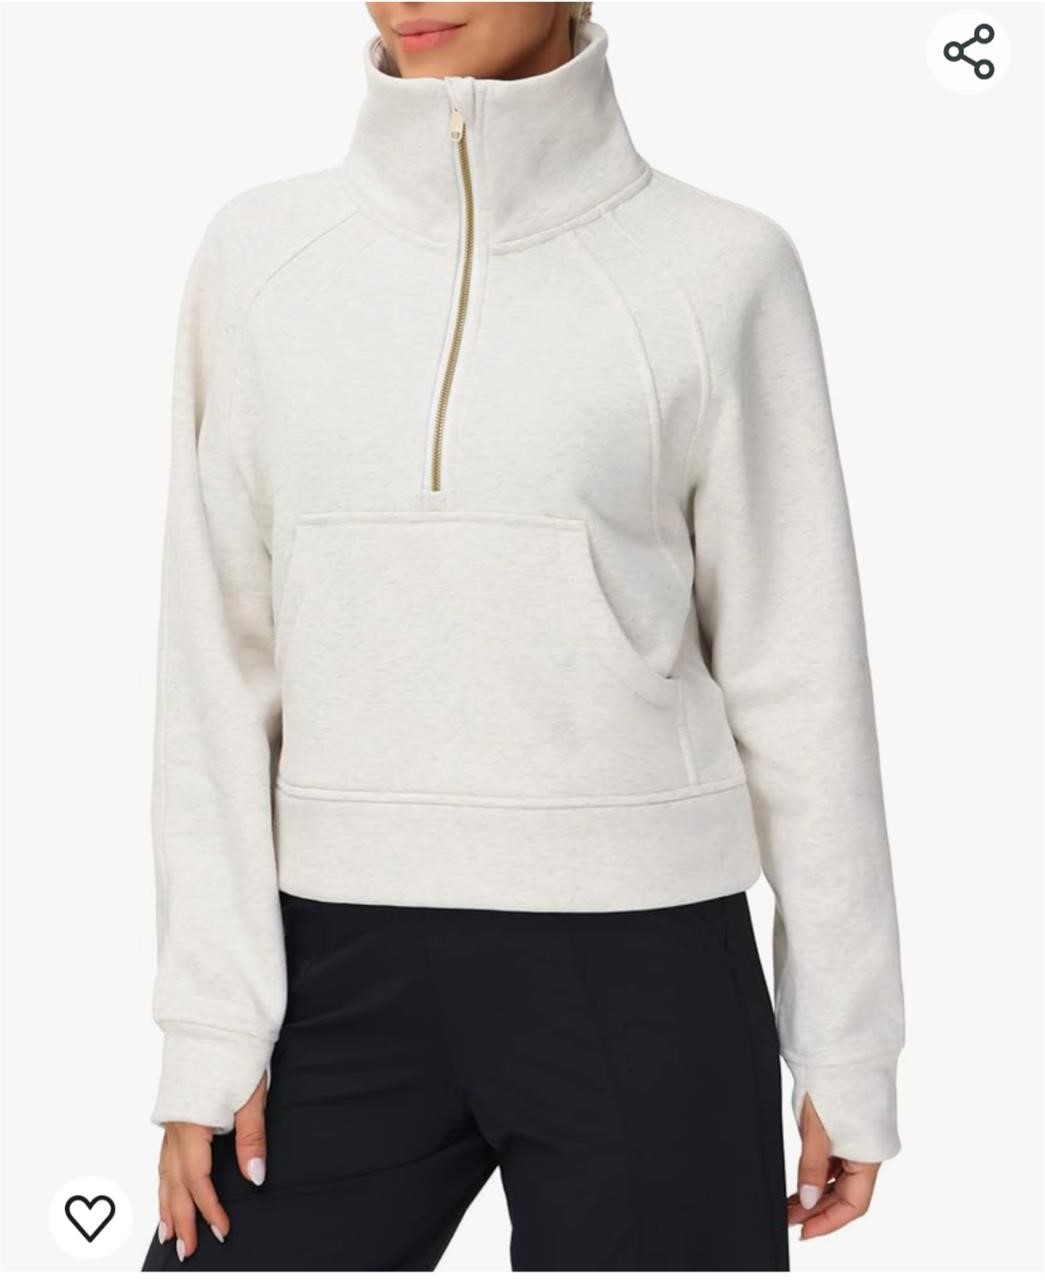 ($46) THE GYM PEOPLE Womens' Half Zip,  SIZE: S